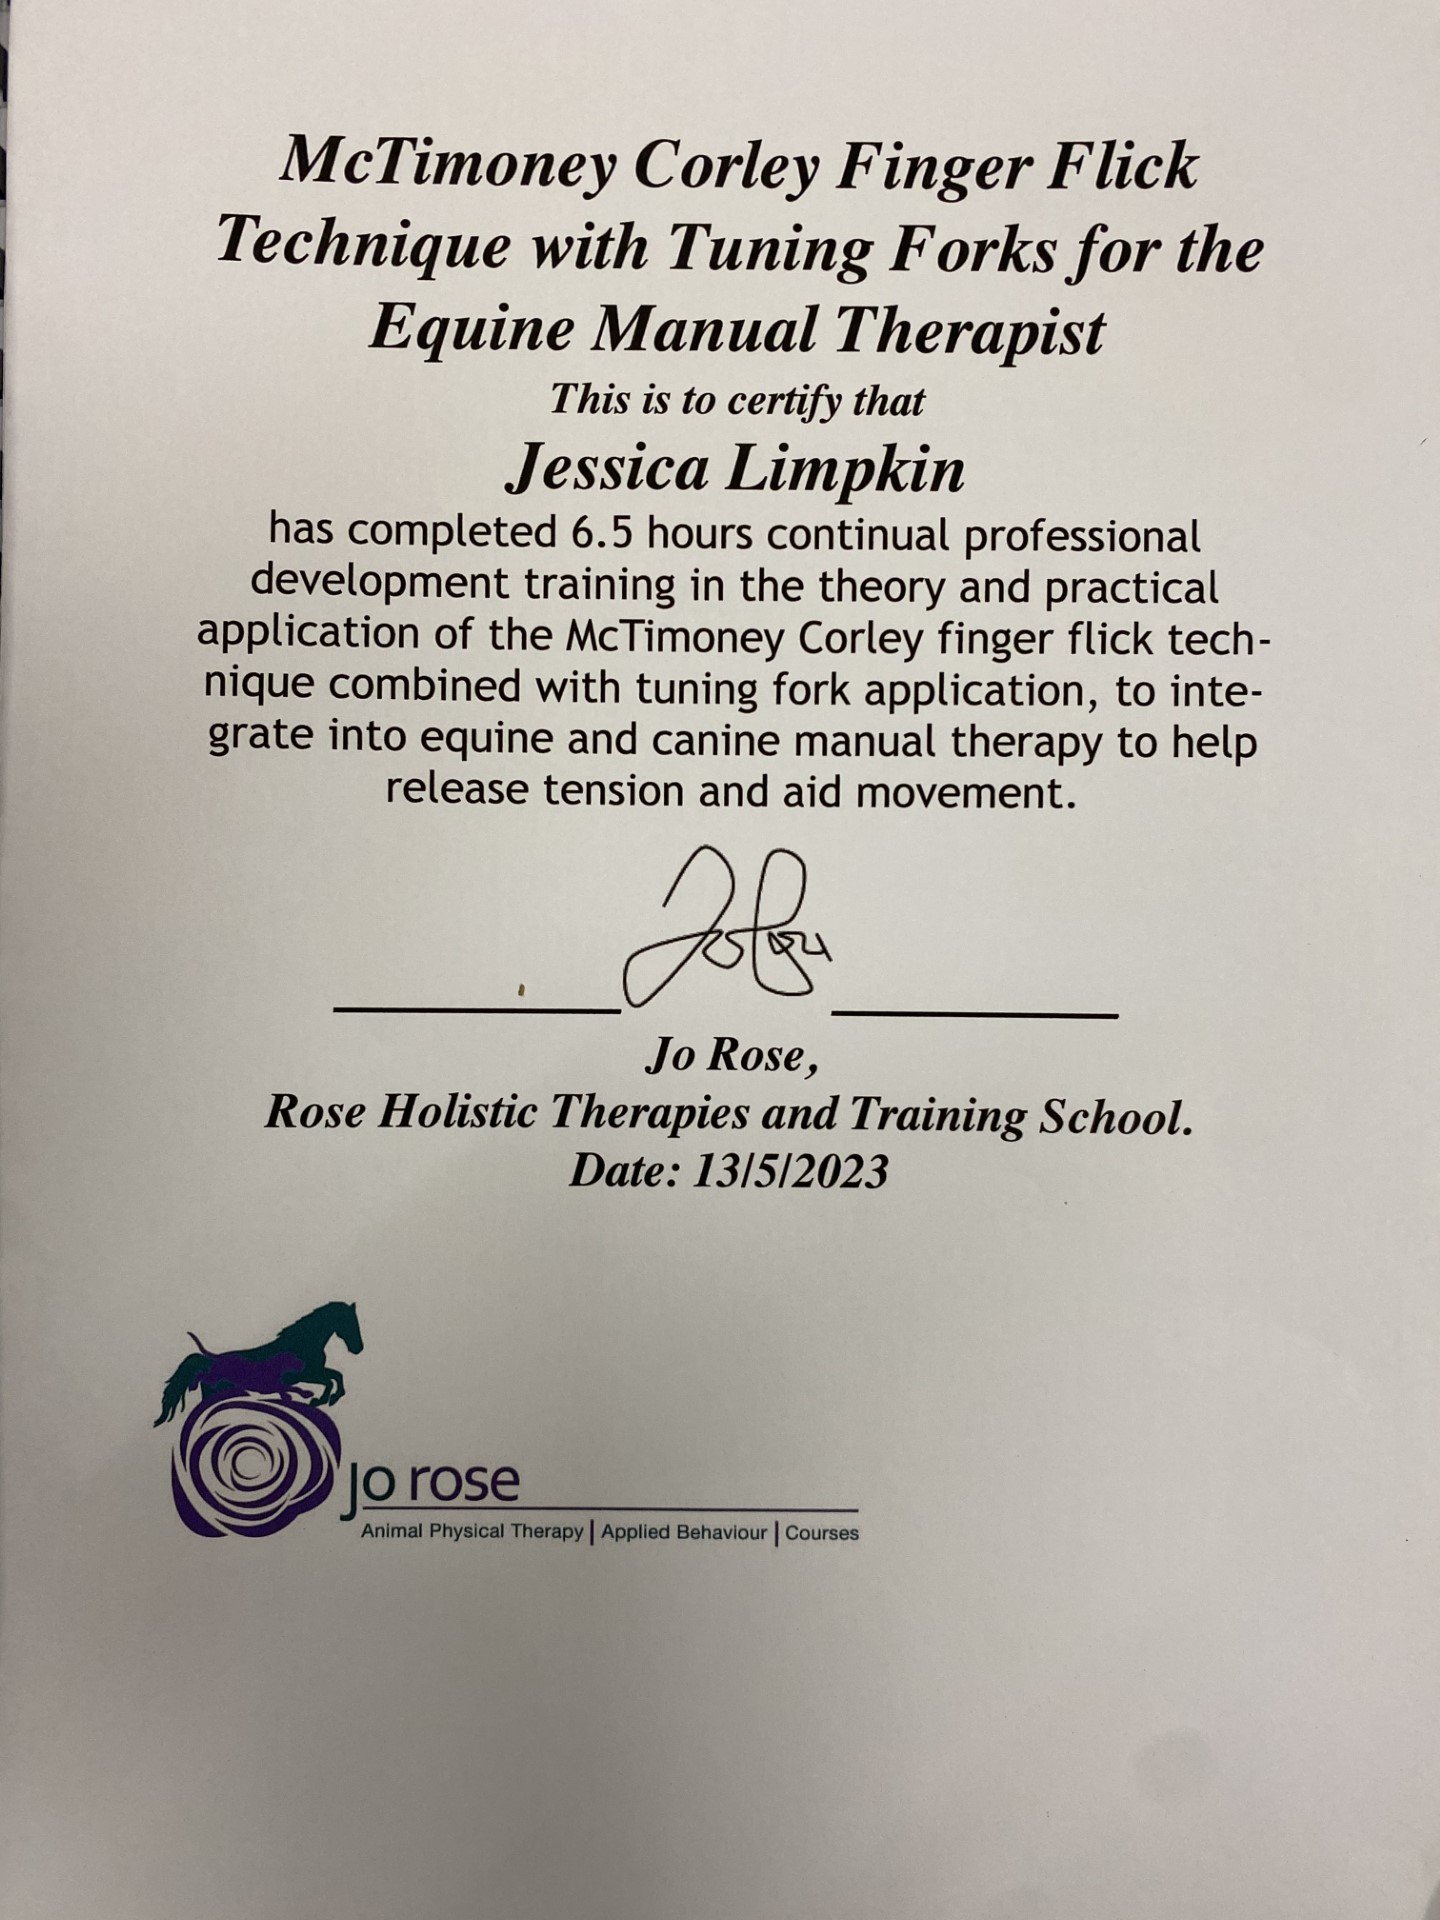 cpd-certificate-jessica-limpkin-equine-massage-therapy-jo-rose-holistic-therapist-training-vibrational-therapy-tuning-forks-mctimoney-corley-finger-flick-technique.jpg